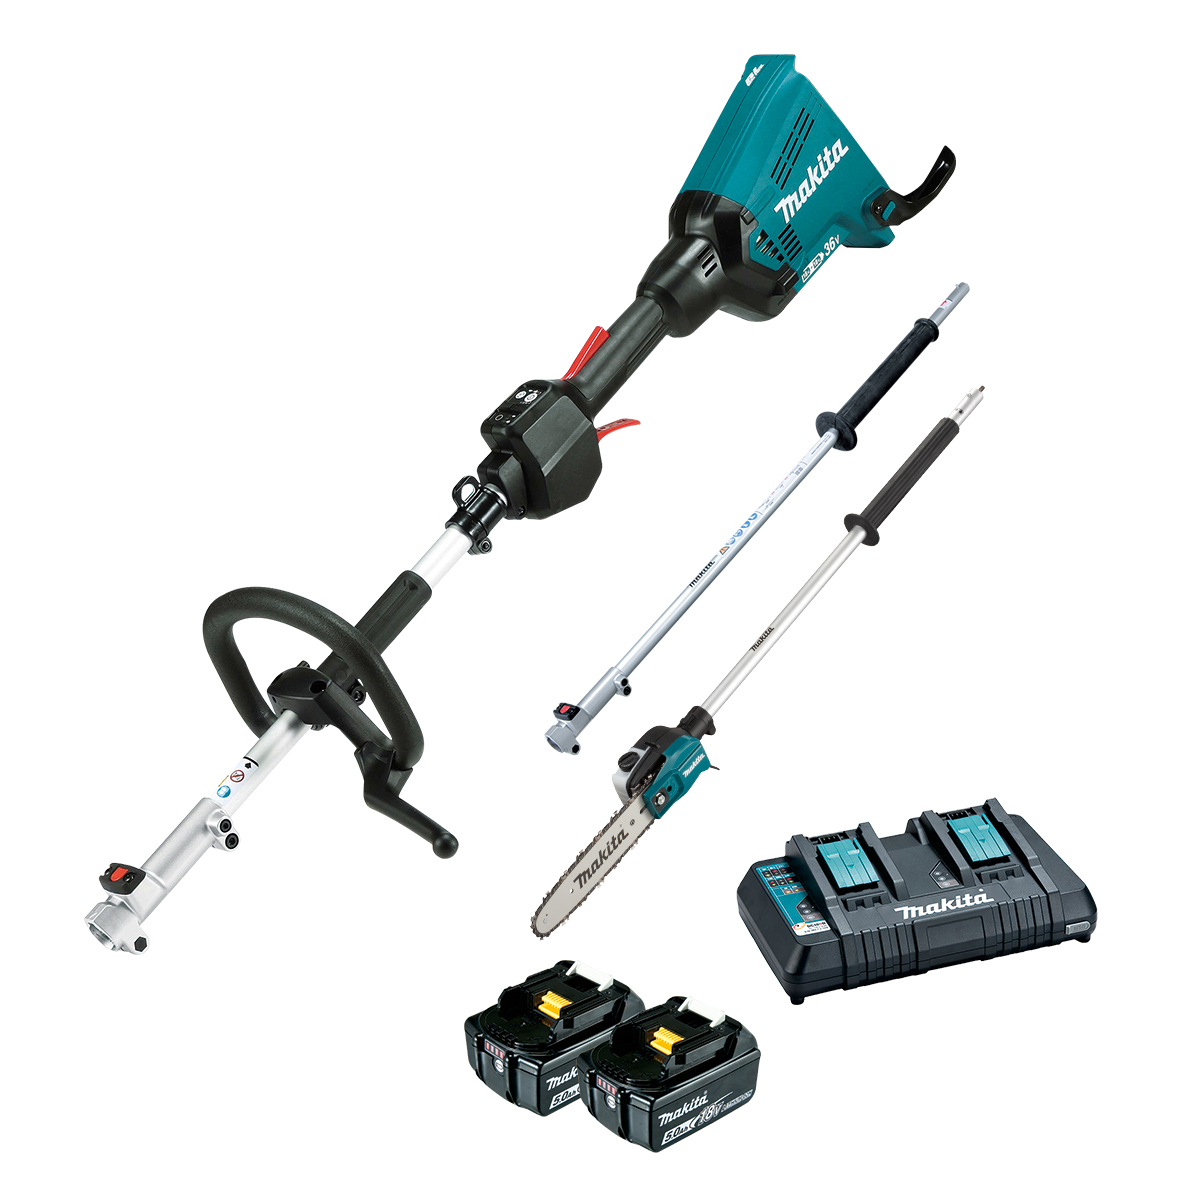 Makita 18Vx2 Brushless Multi-Function Power Head with Attachments 5.0Ah Kit DUX60PSPT2